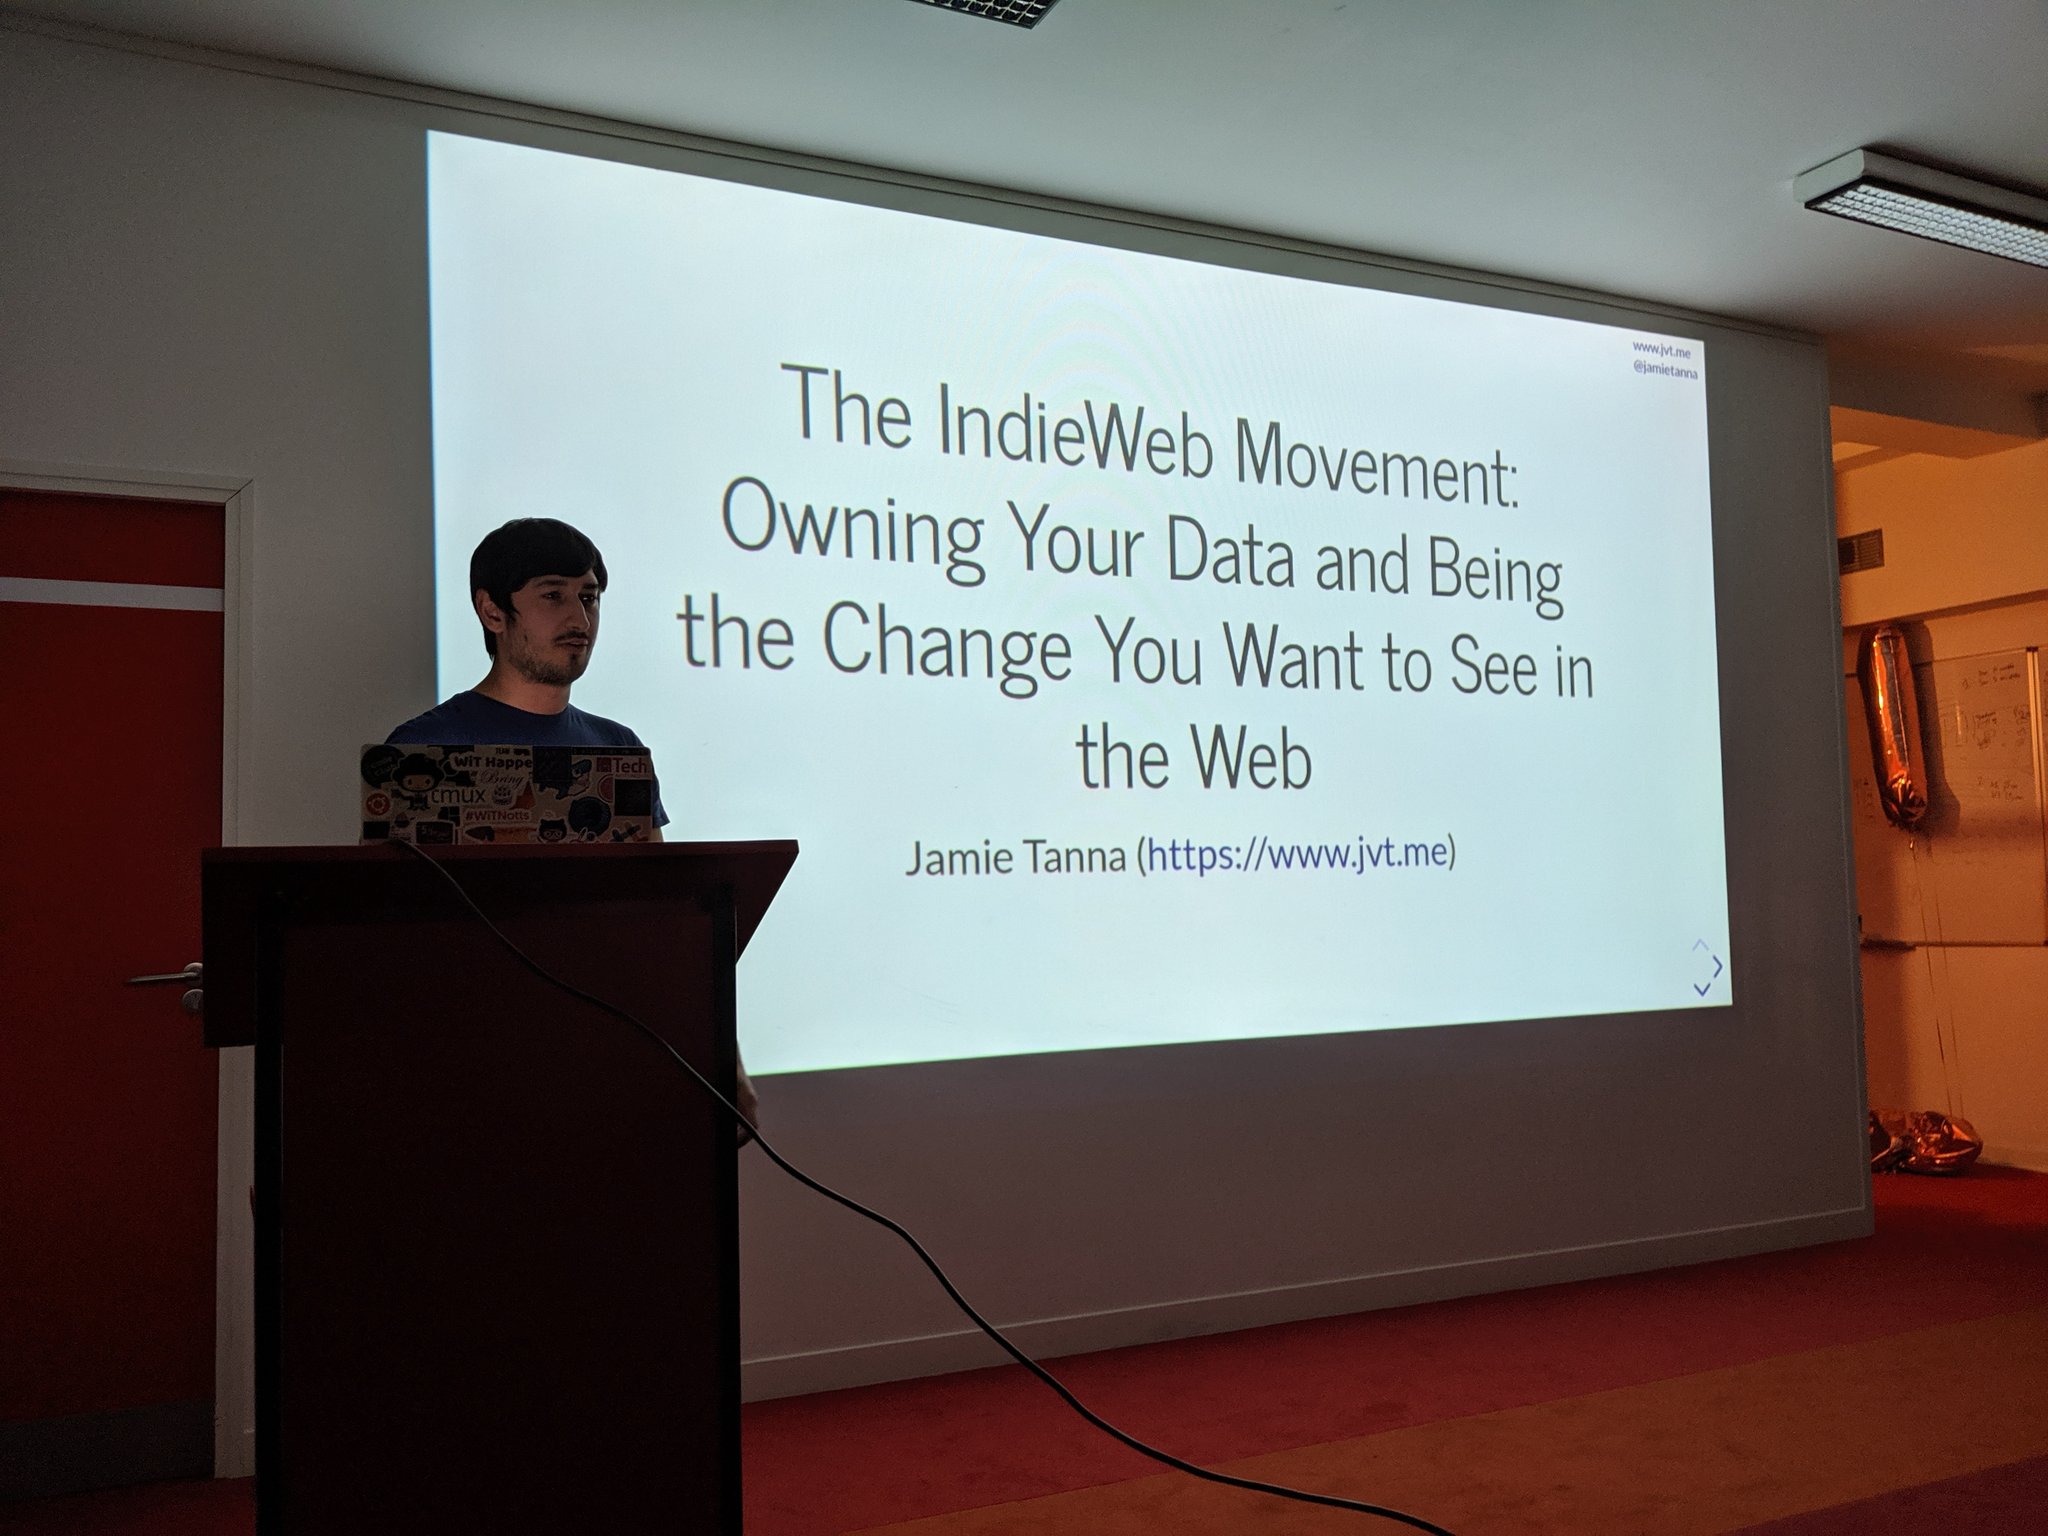 Jamie Tanna speaking about the IndieWeb